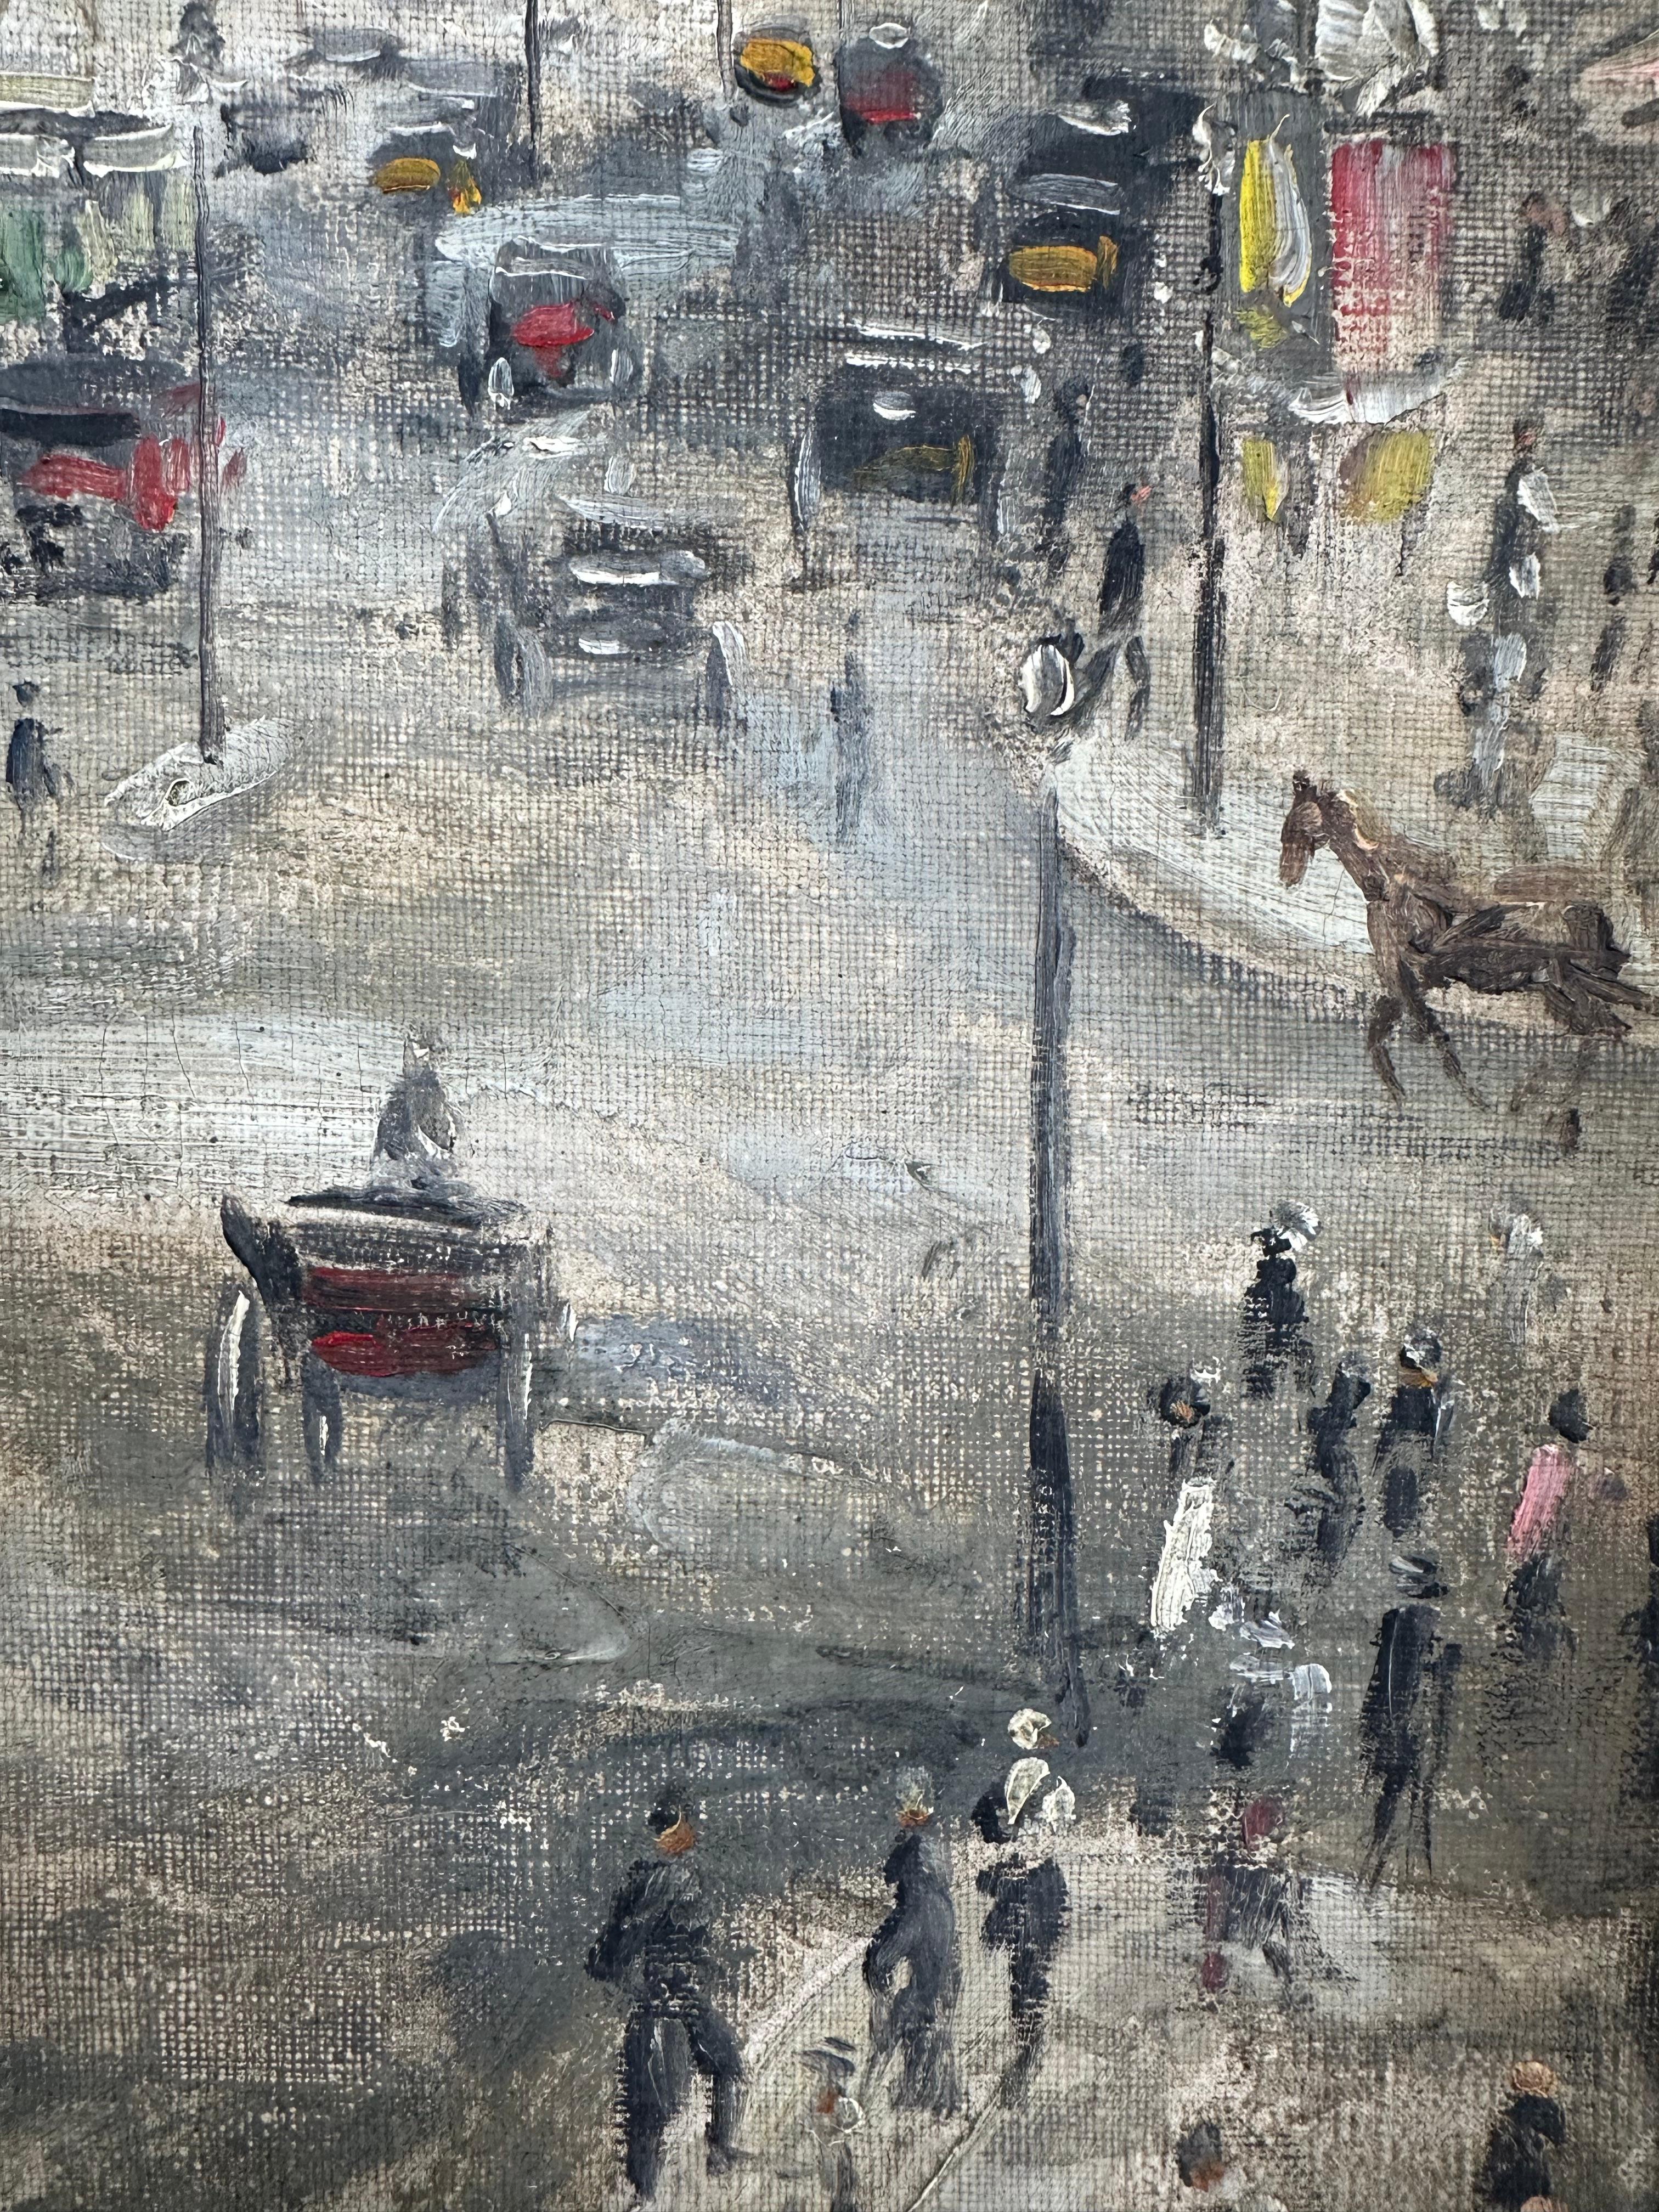 Beautiful ca. 1950s painting depicts Parisian cityscape. Artist unknown. Oil on canvas measures 16 x 20 inches; 24 x 28 inches framed. Signed lower right. The painting has some water staining on back of canvas. Frame is in perfectly clean condition. 